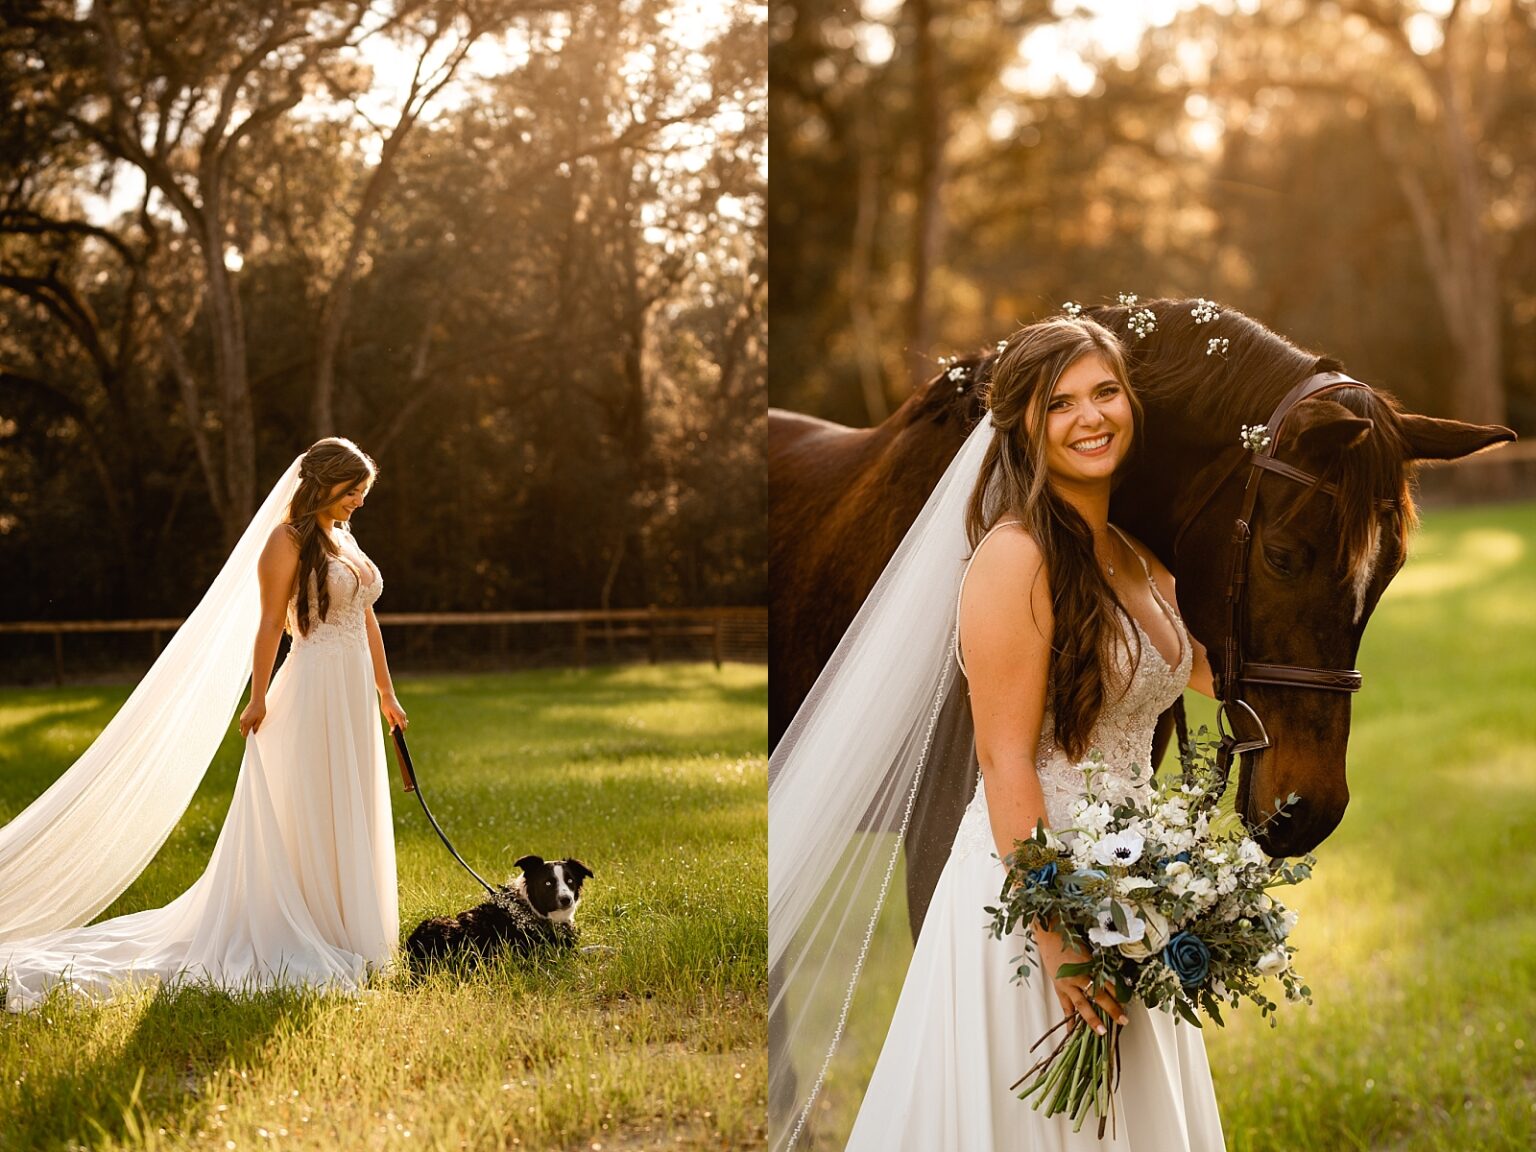 Equestrian wedding takes pictures with her horse in her wedding dress with her new husband during golden hour. Horse Photographer for Weddings.